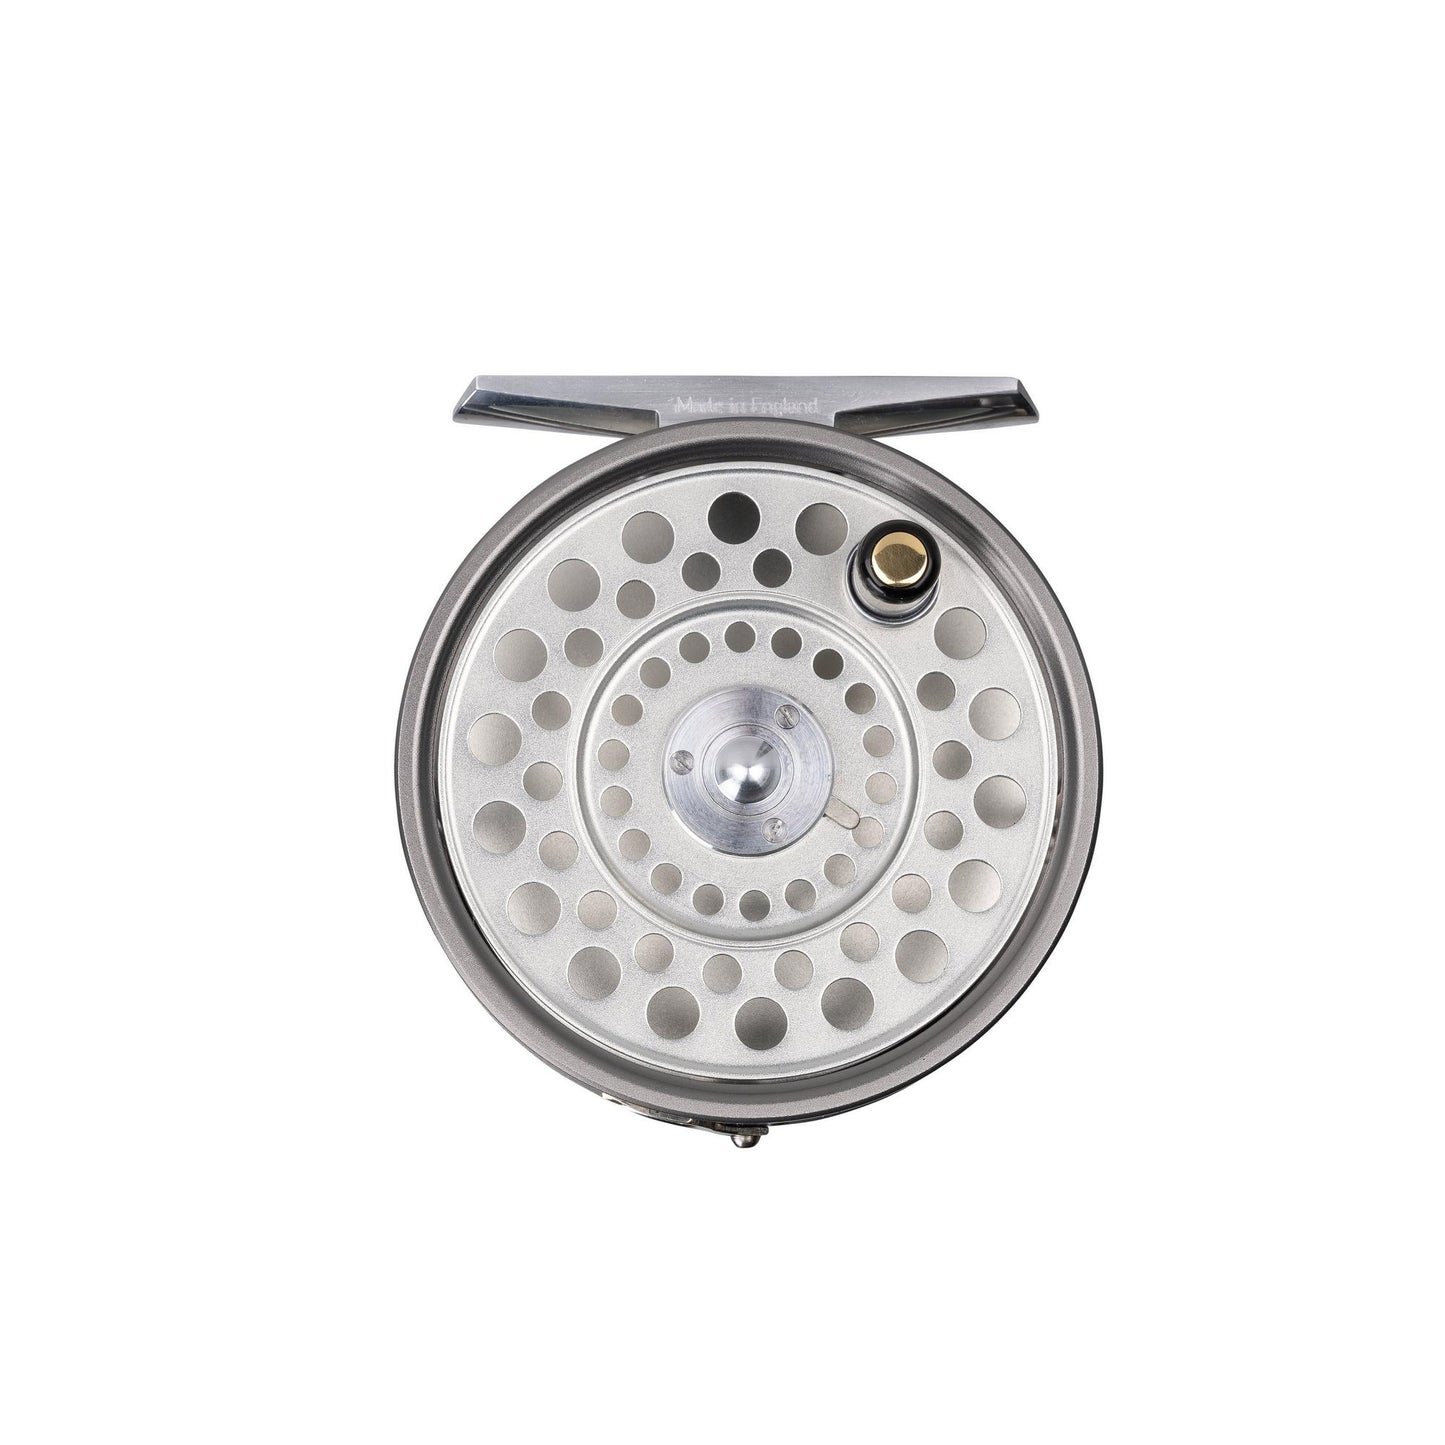 Hardy Featherweight (4/5wt) Fly Reel